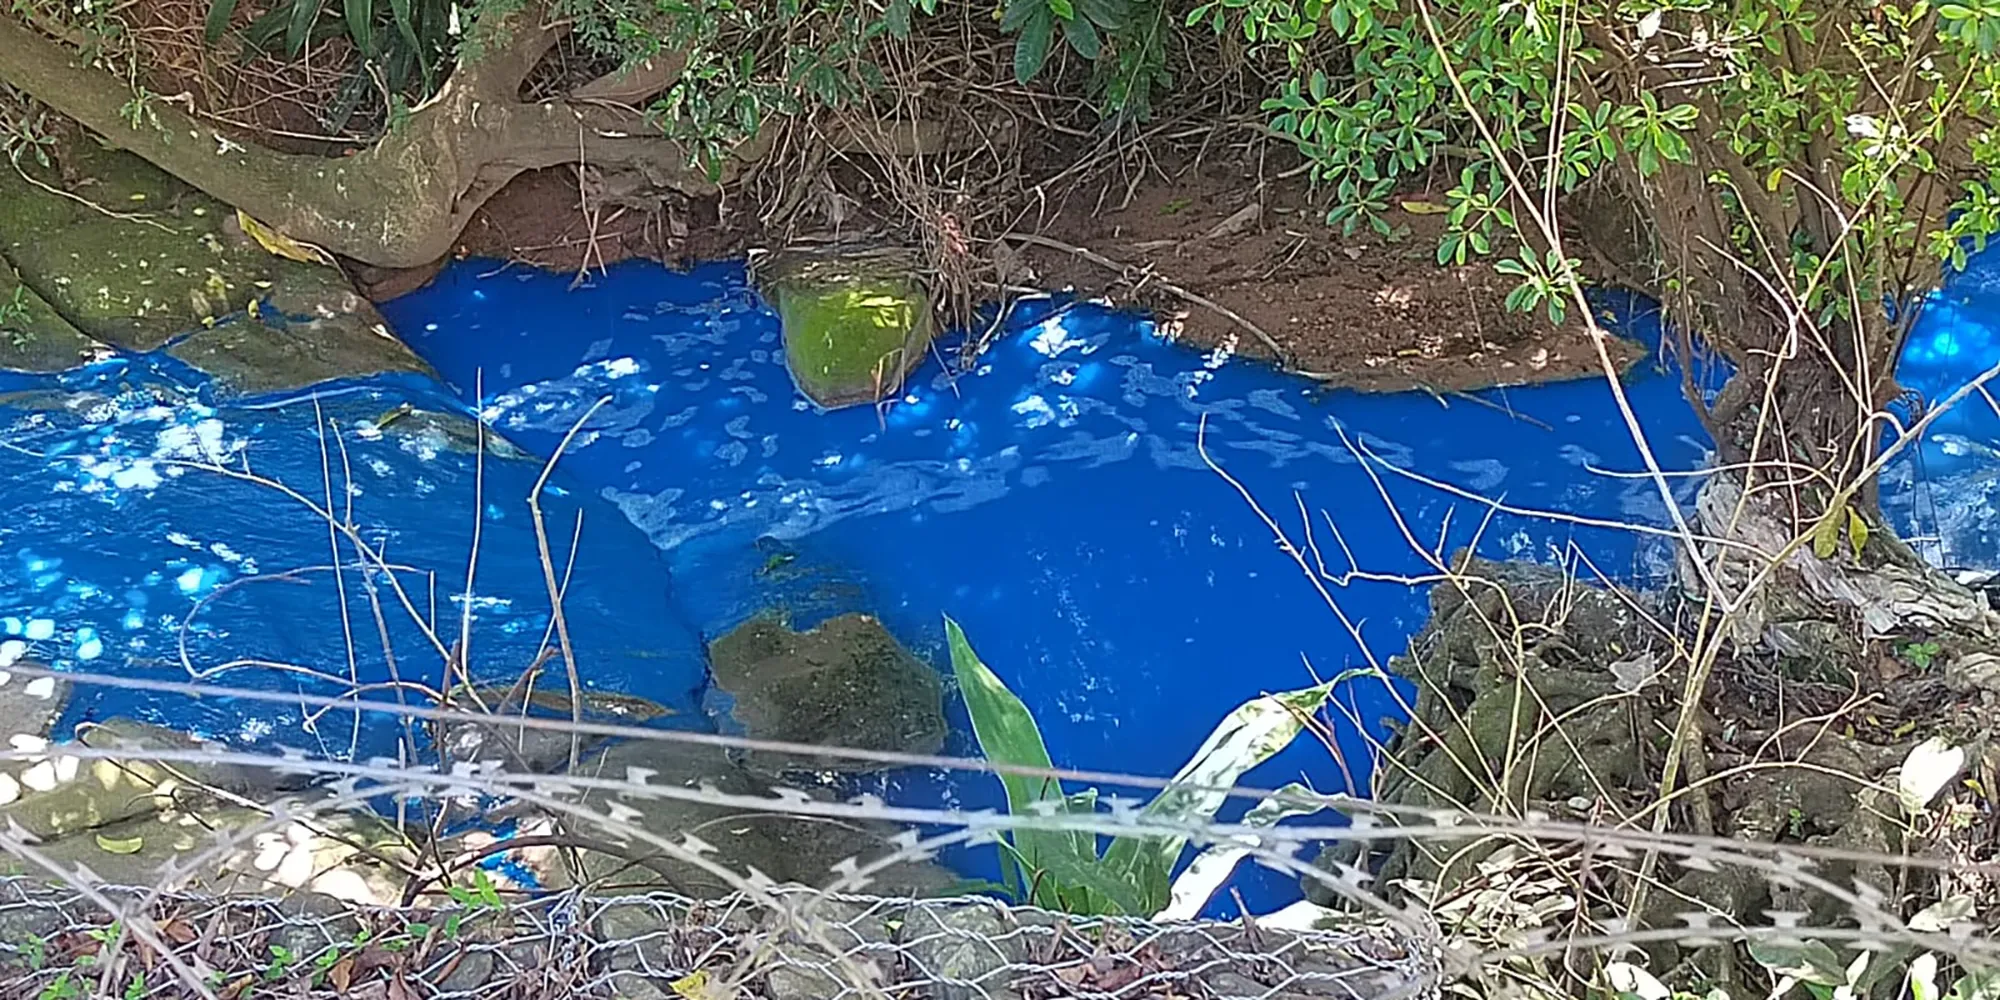 Bright blue stream sparks new call for Durban water pollution